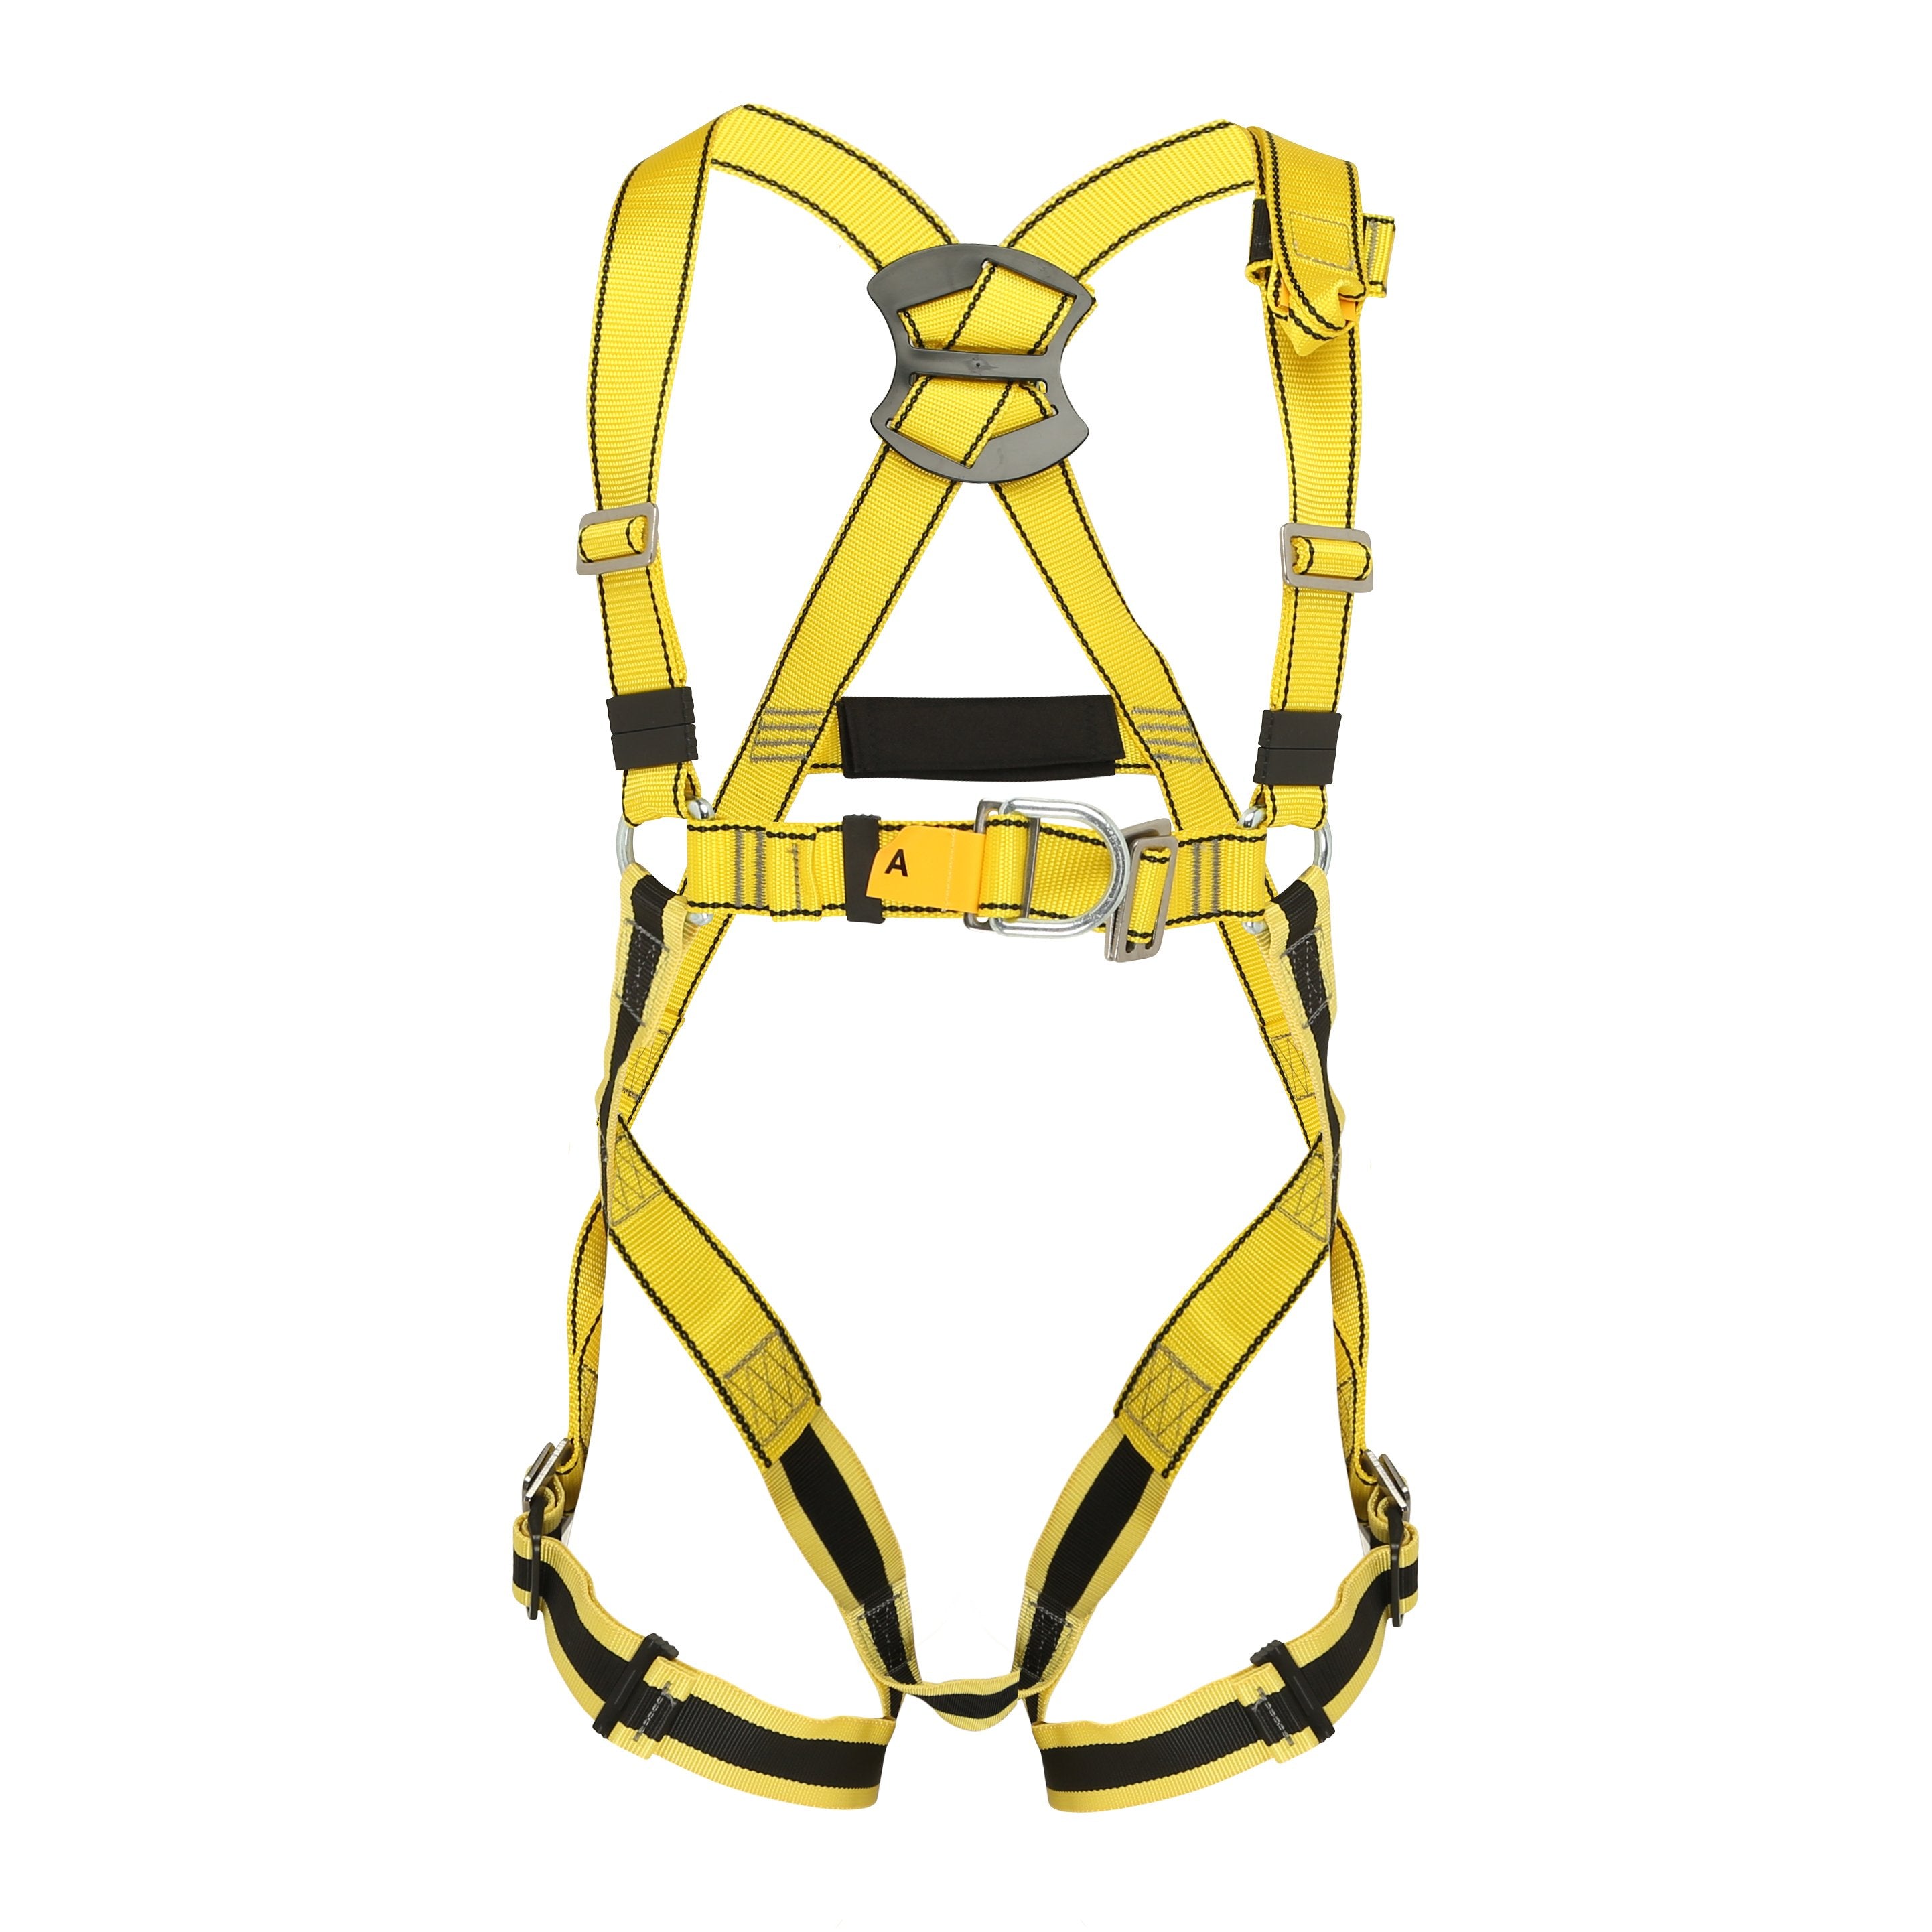 https://leachs.com/cdn/shop/products/bigbenr-deluxe-2-point-safety-harness-fp-4405exs-leachs_2884x.jpg?v=1629976081